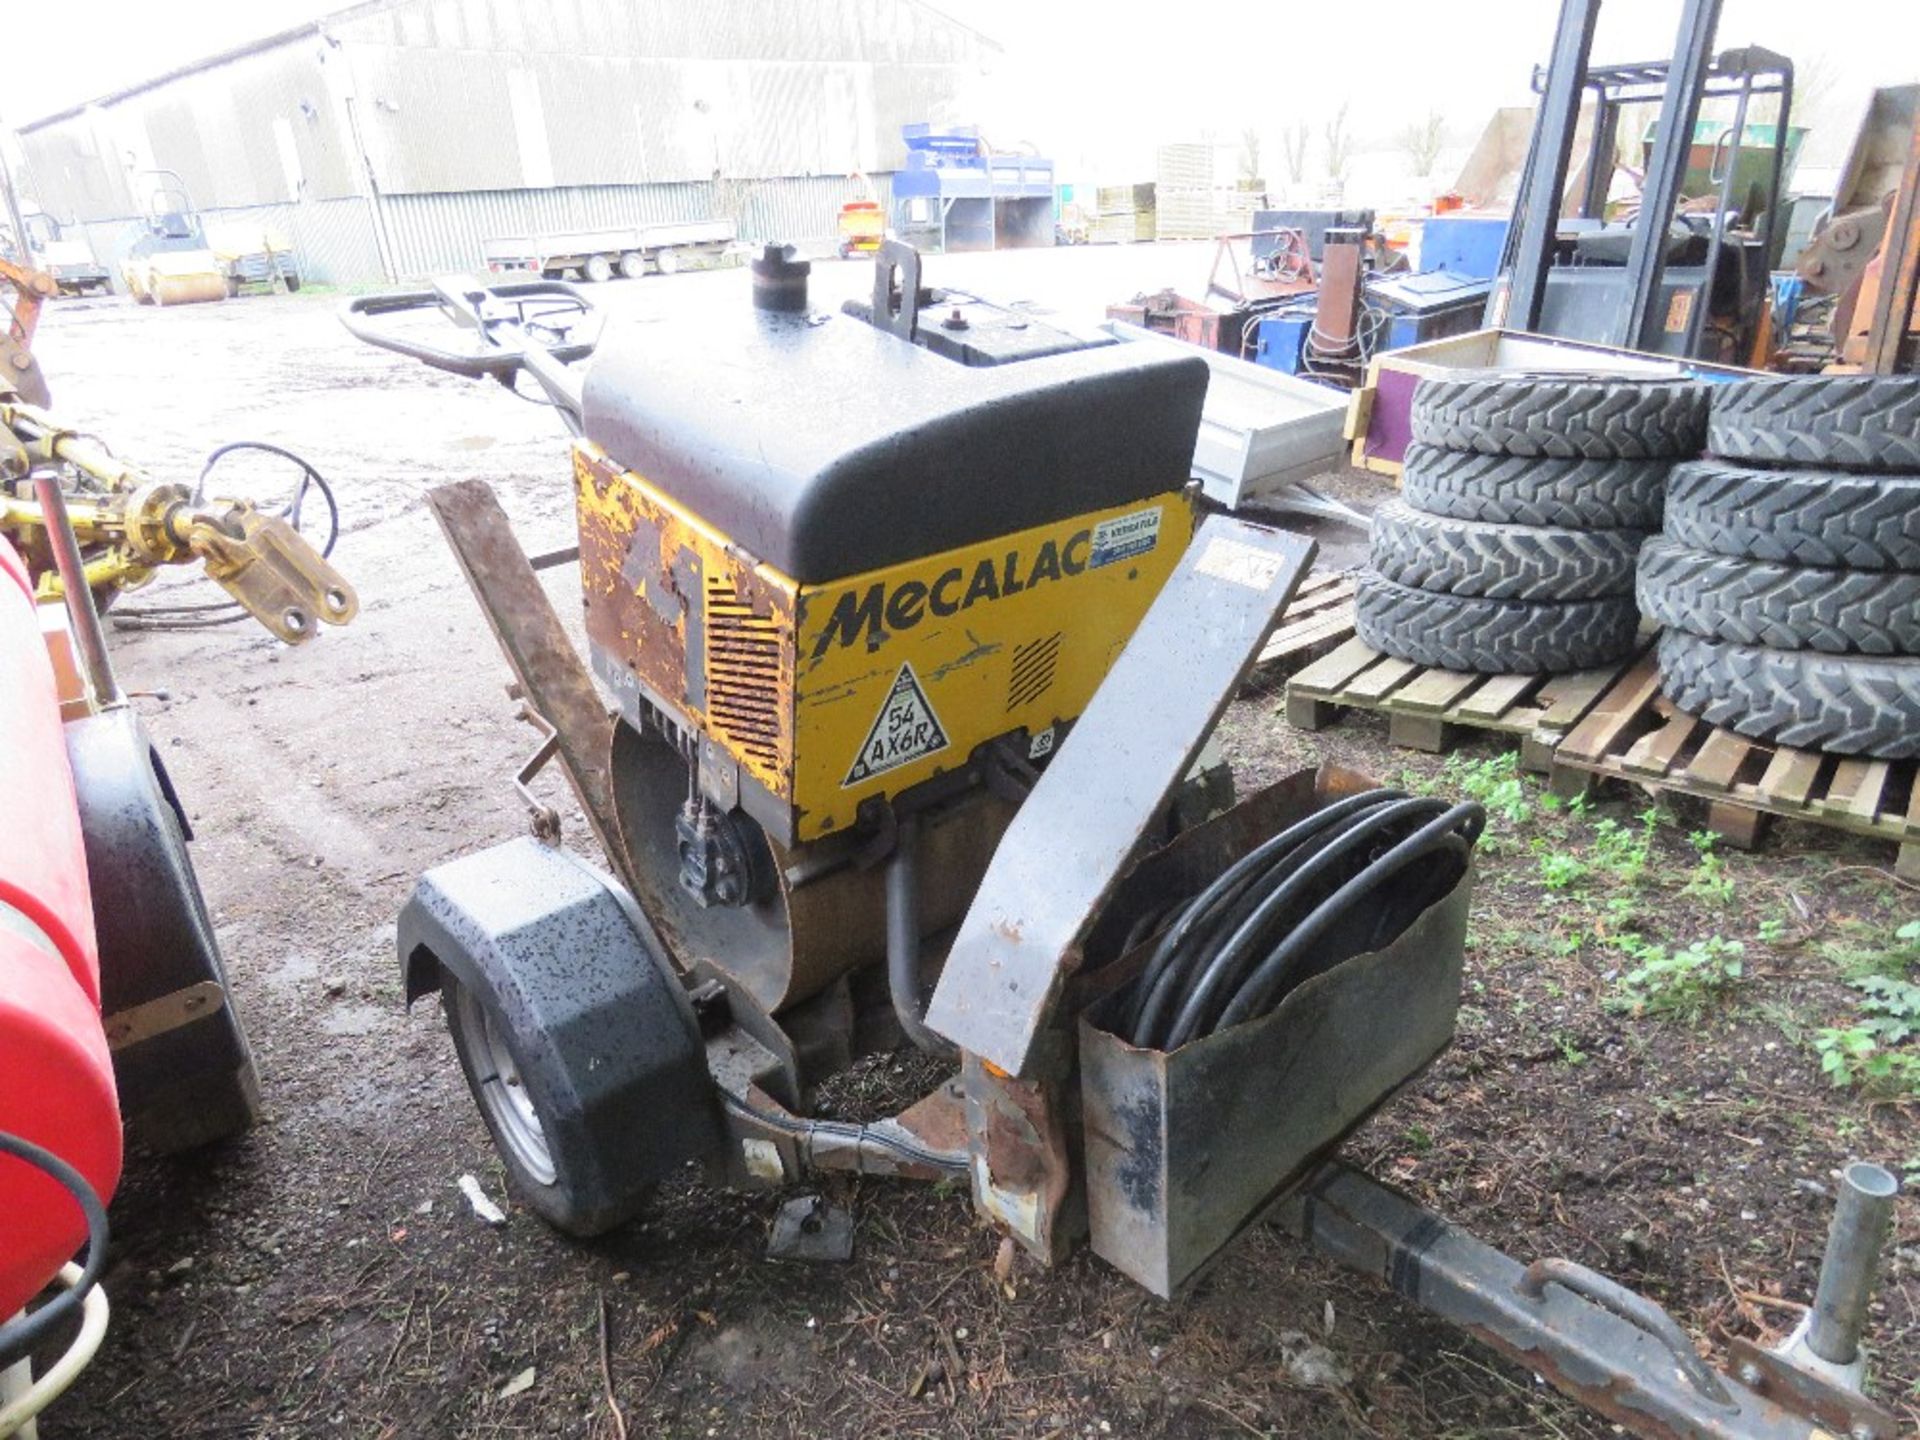 MECALAC MBR71 SINGLE DRUM ROLLER BREAKER ON TRAILER YEAR 2019. 462 REC HOURS. WITH BREAKER AND HOSES - Image 5 of 6